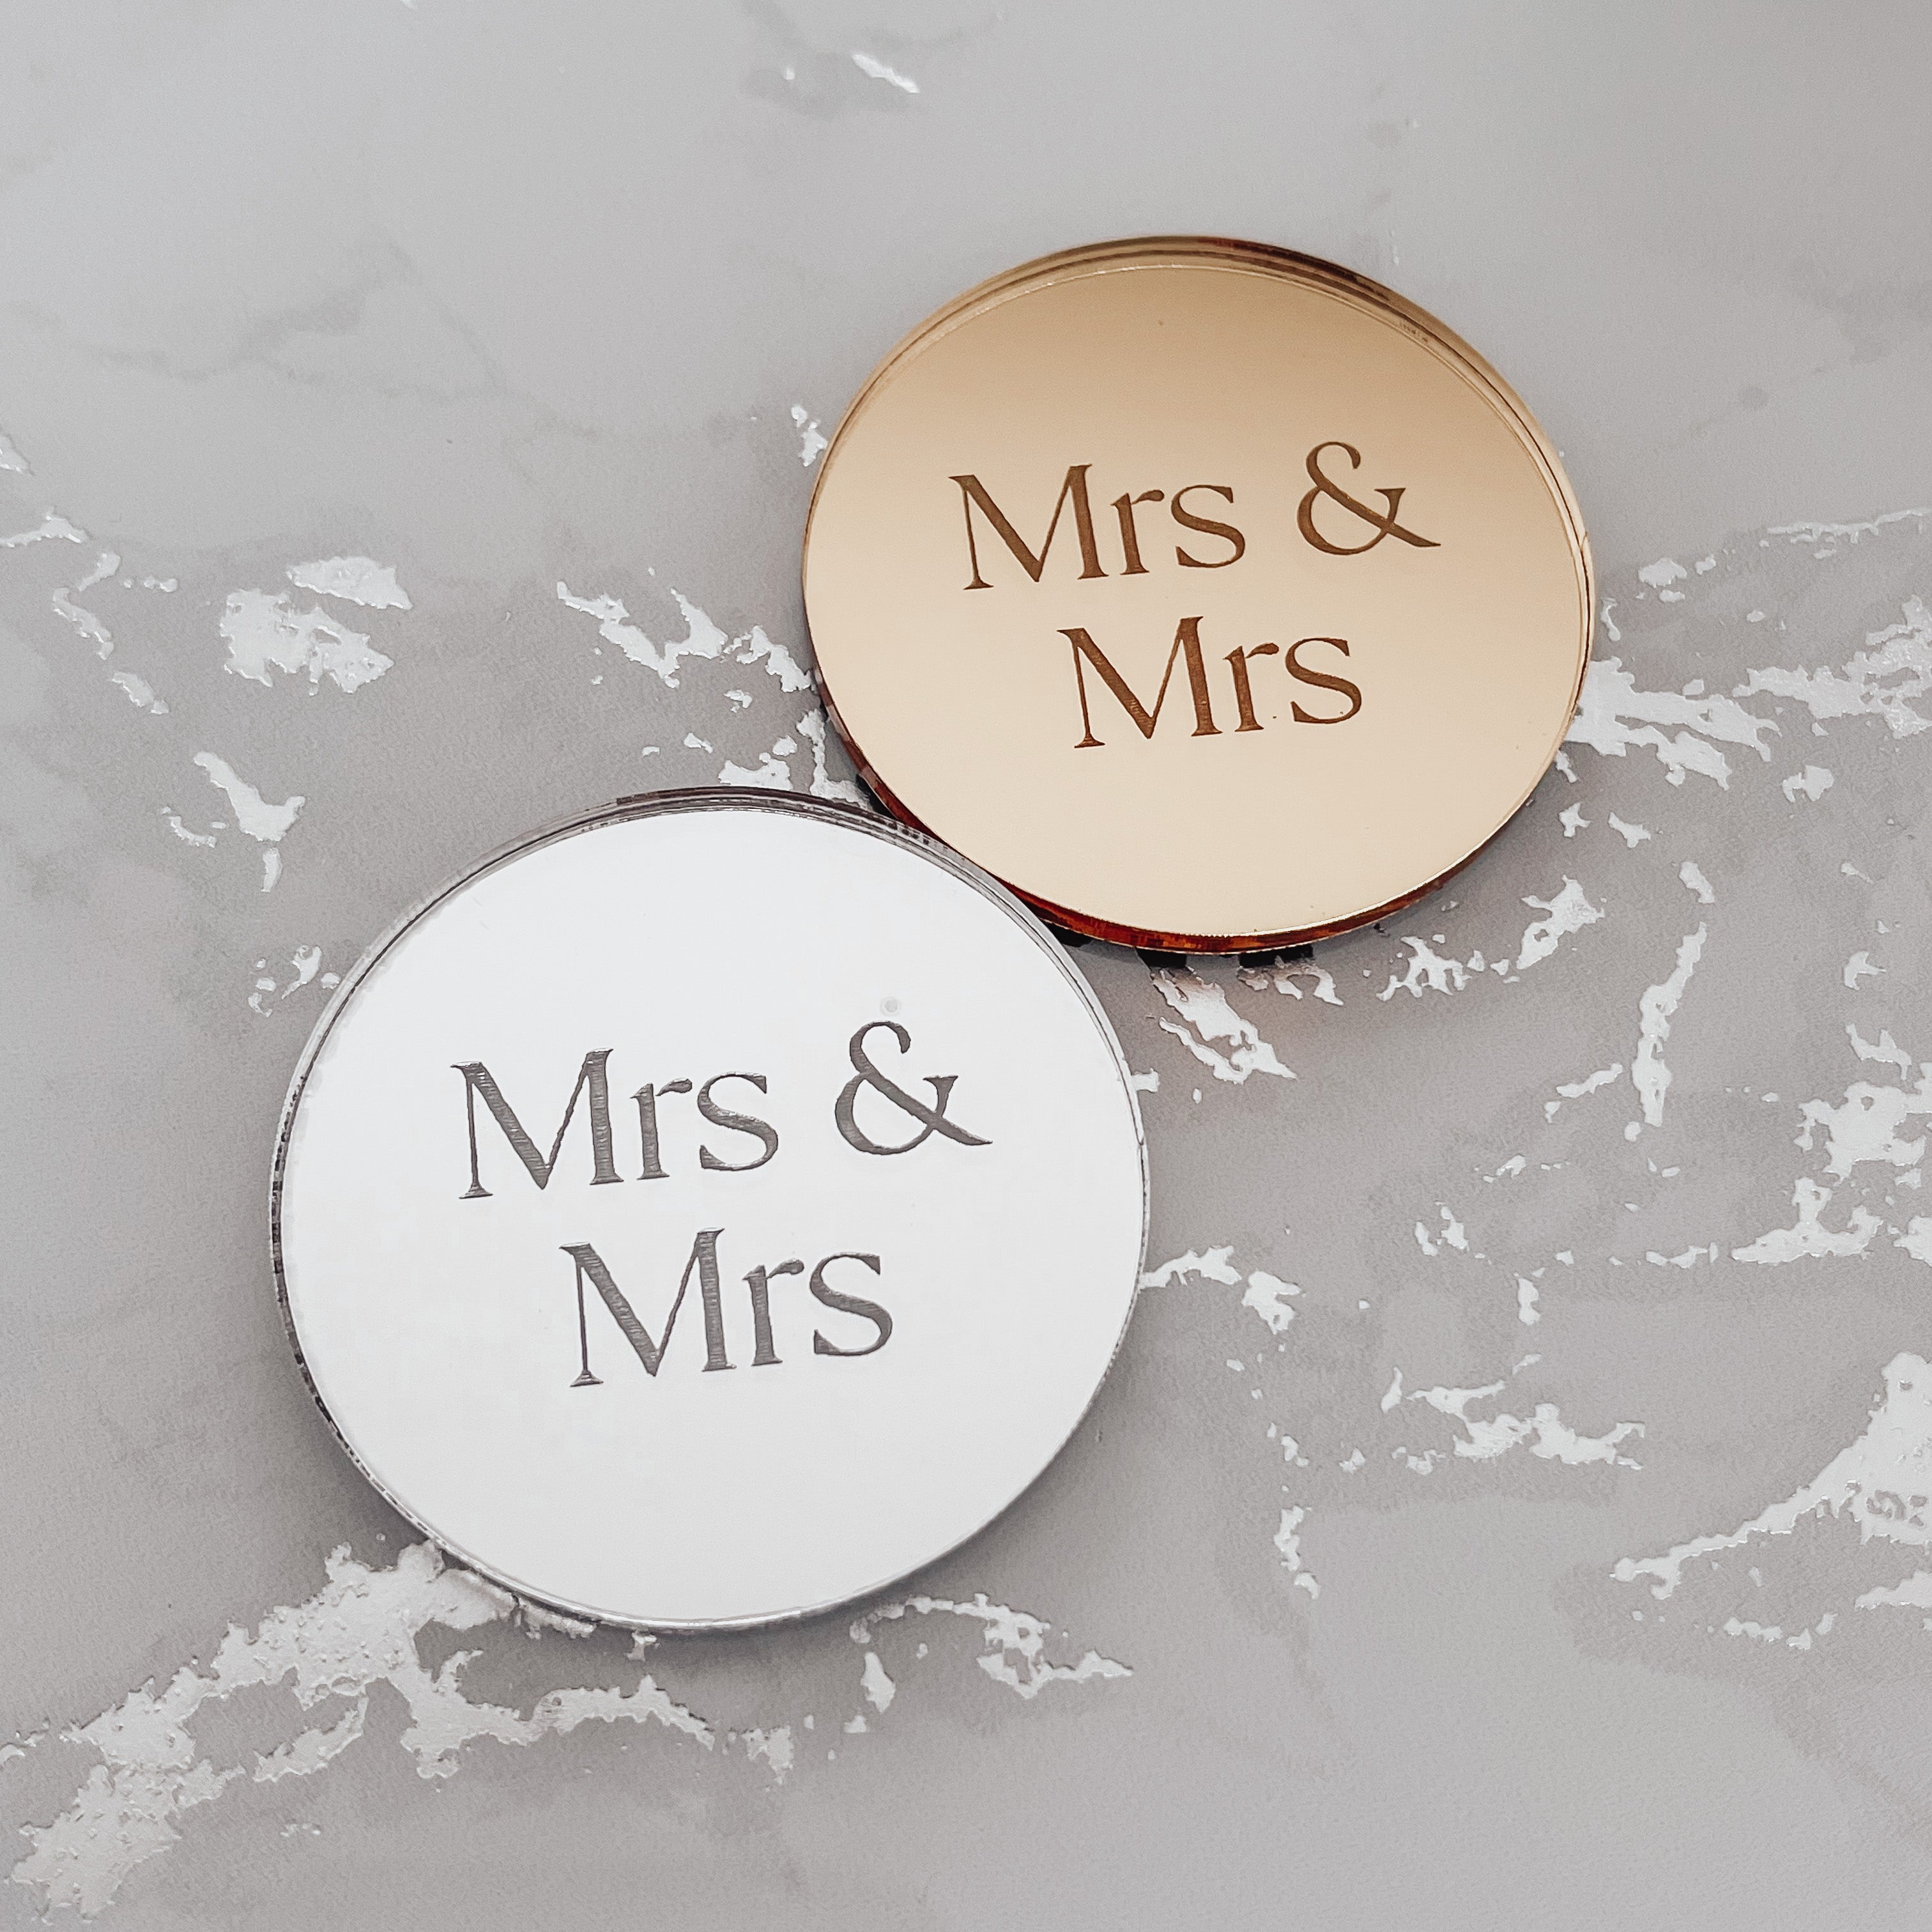 Mrs & Mrs Gift Tags